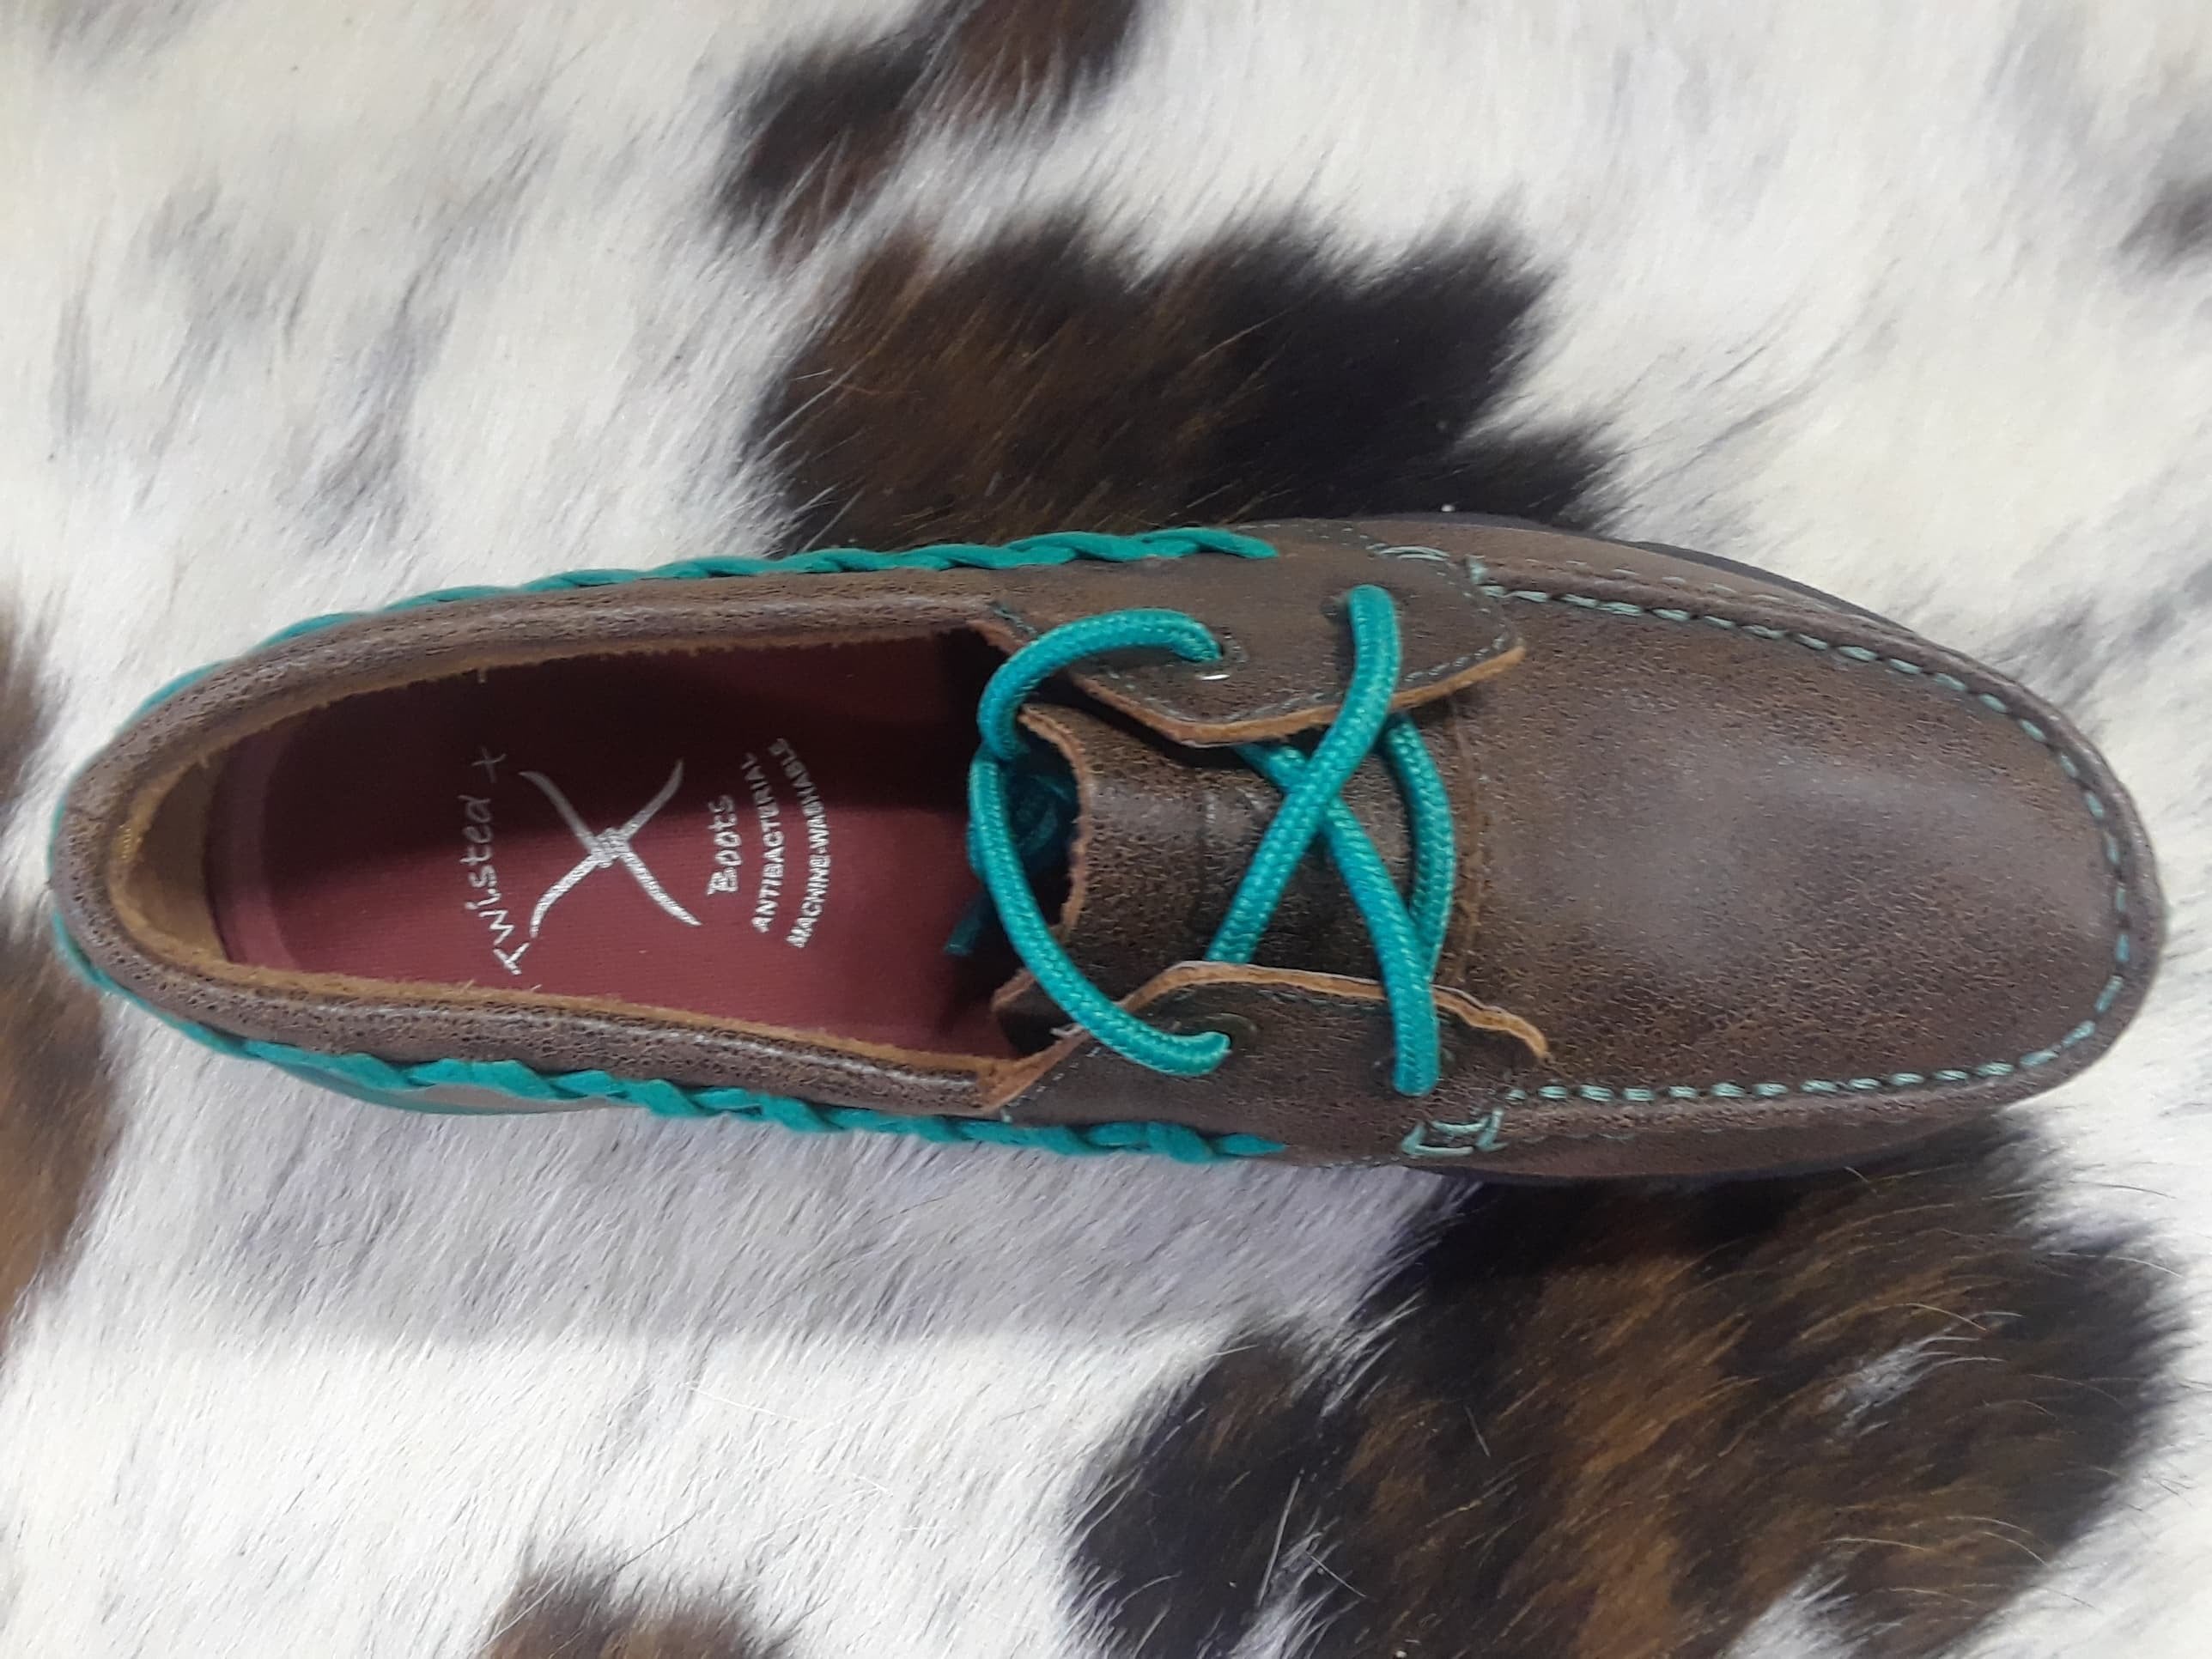 RM Tack Exclusive Turquoise Driving Moc - RM Tack & Apparel